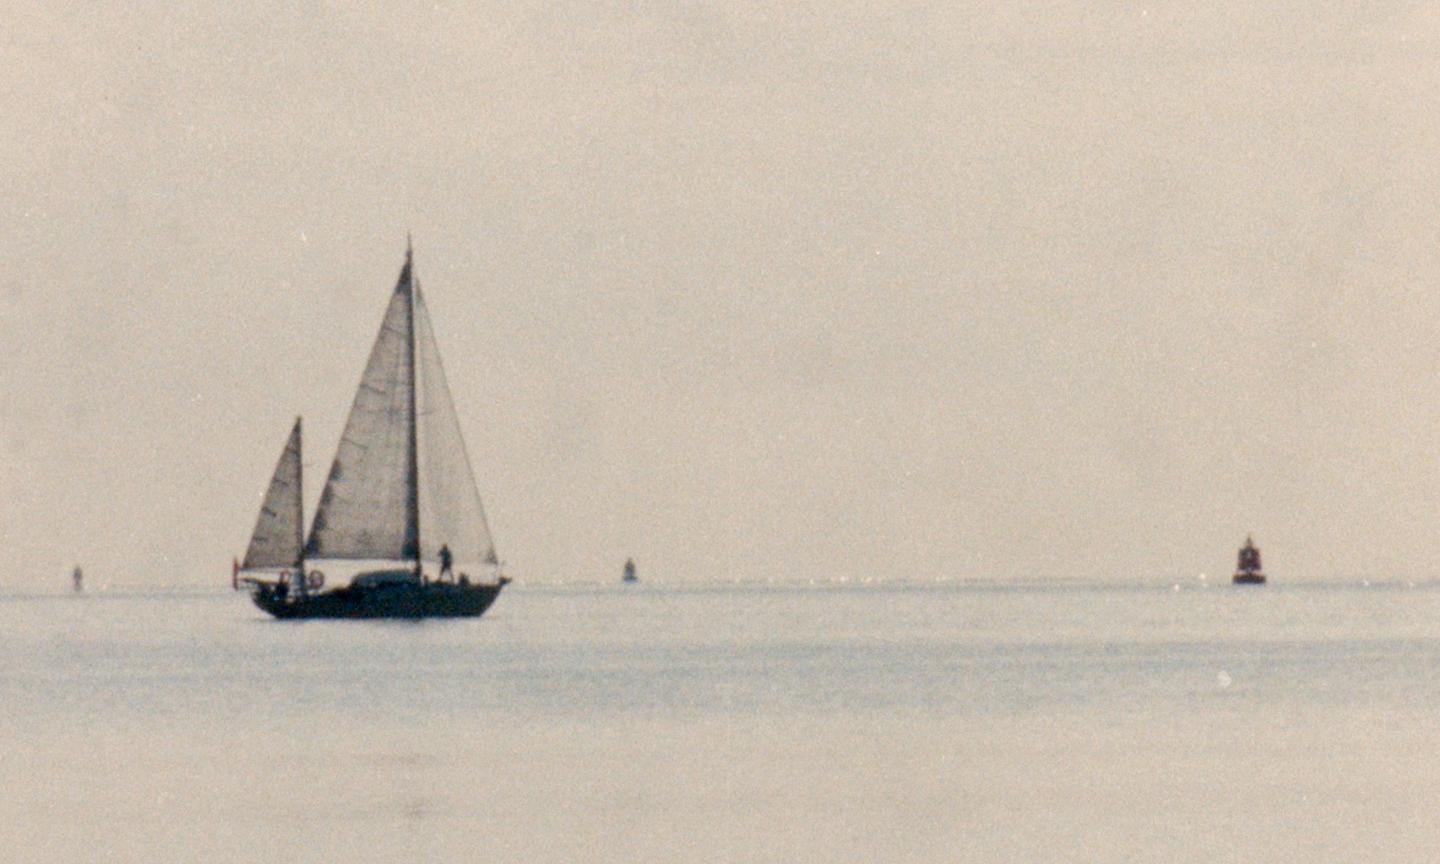 The sky and water are a washed out pale colour. The foreground is of a small sailing vessel with three white sails flown and the silhouette of a person on deck. There are navigation markers visible.